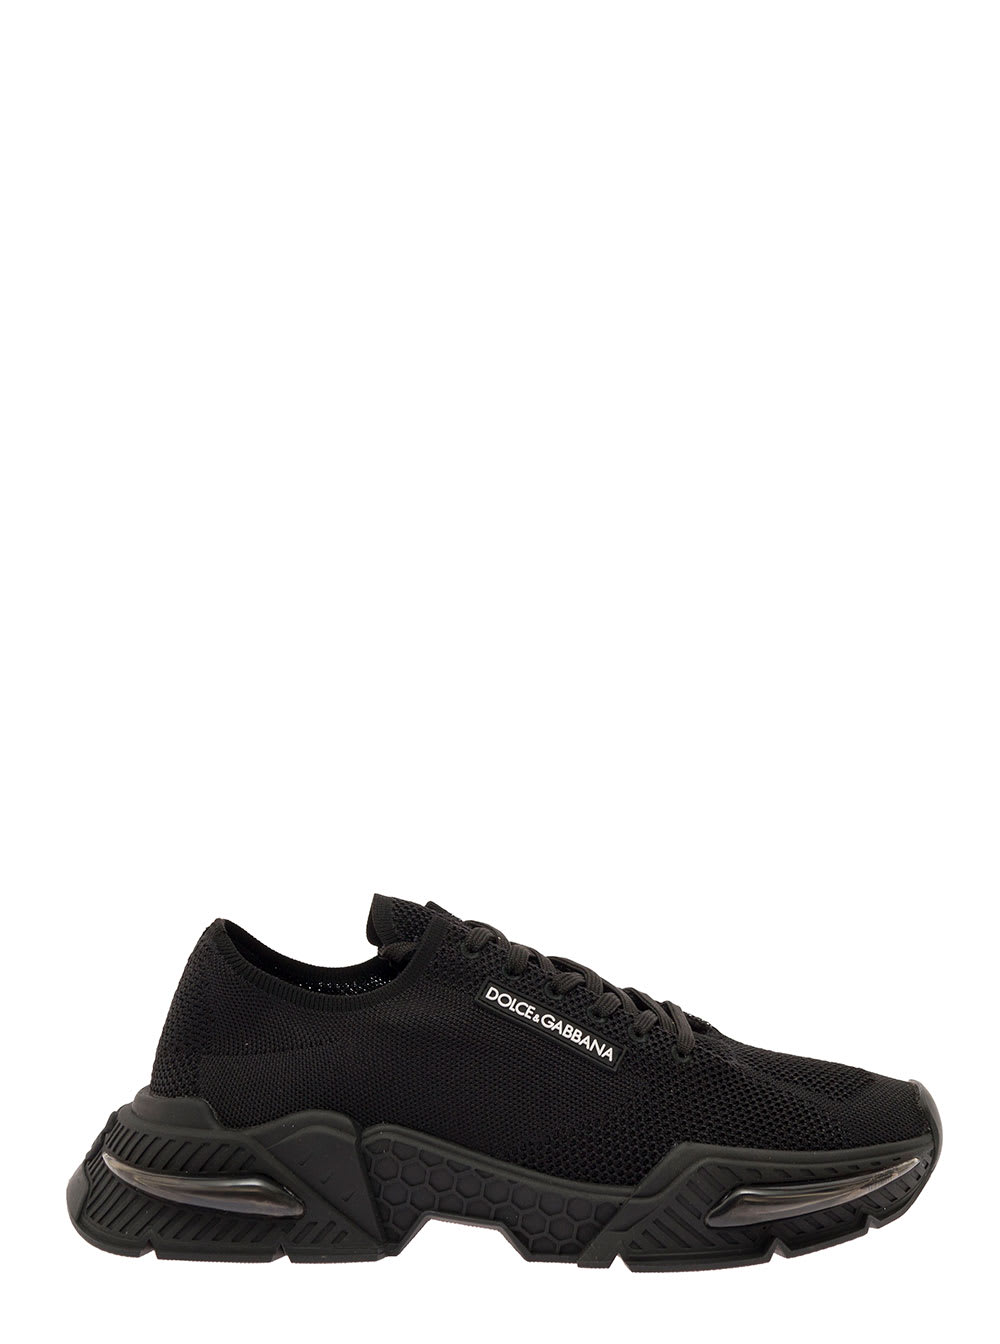 Dolce & Gabbana Black Daymaster Sneakers In Stretch Knit Man